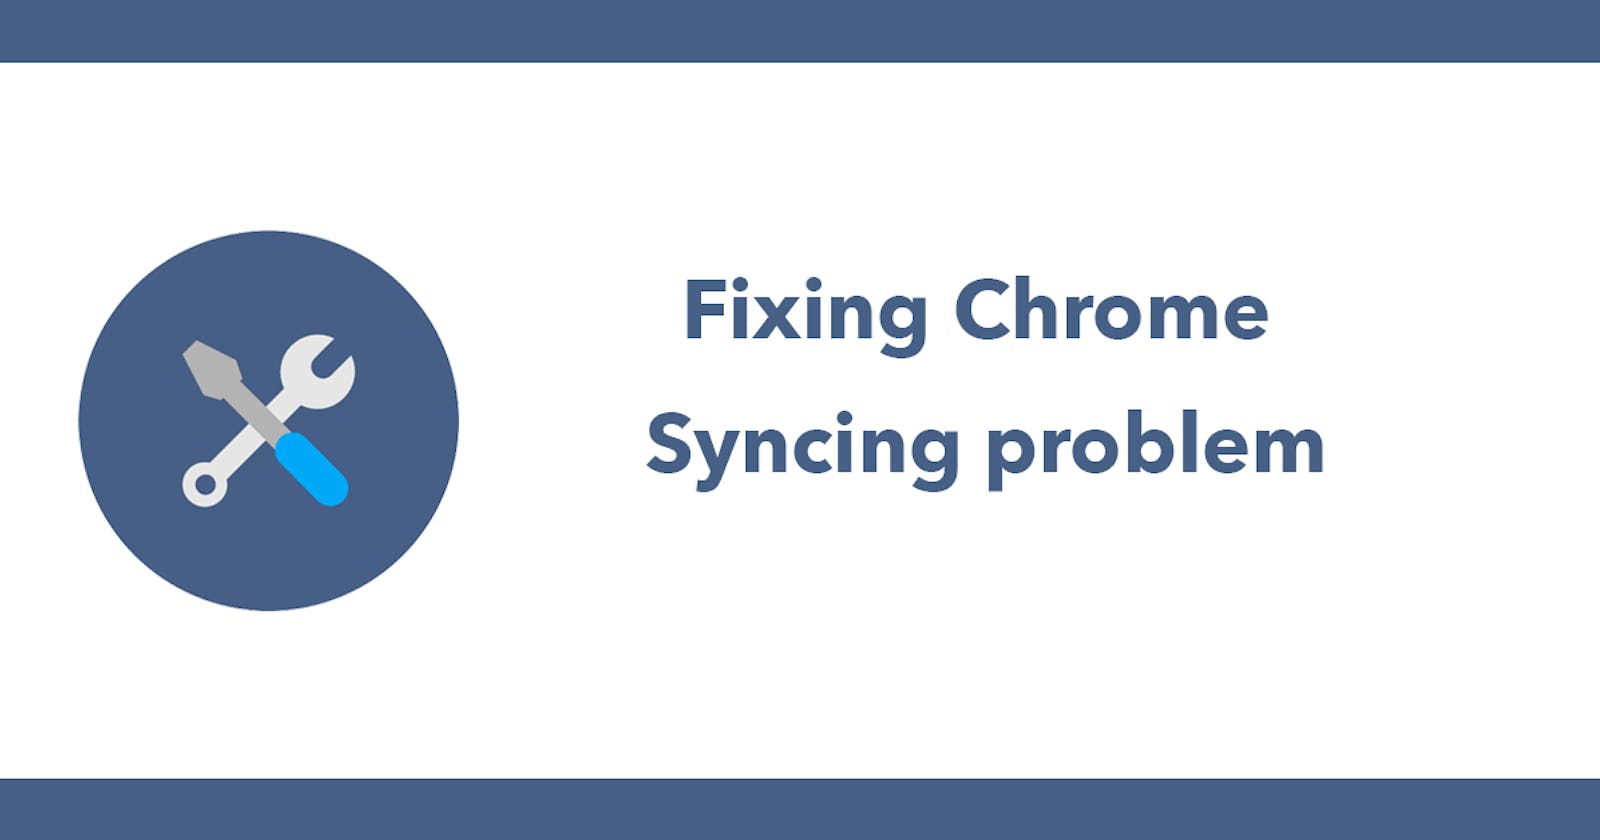 Fixing Chrome Syncing problem